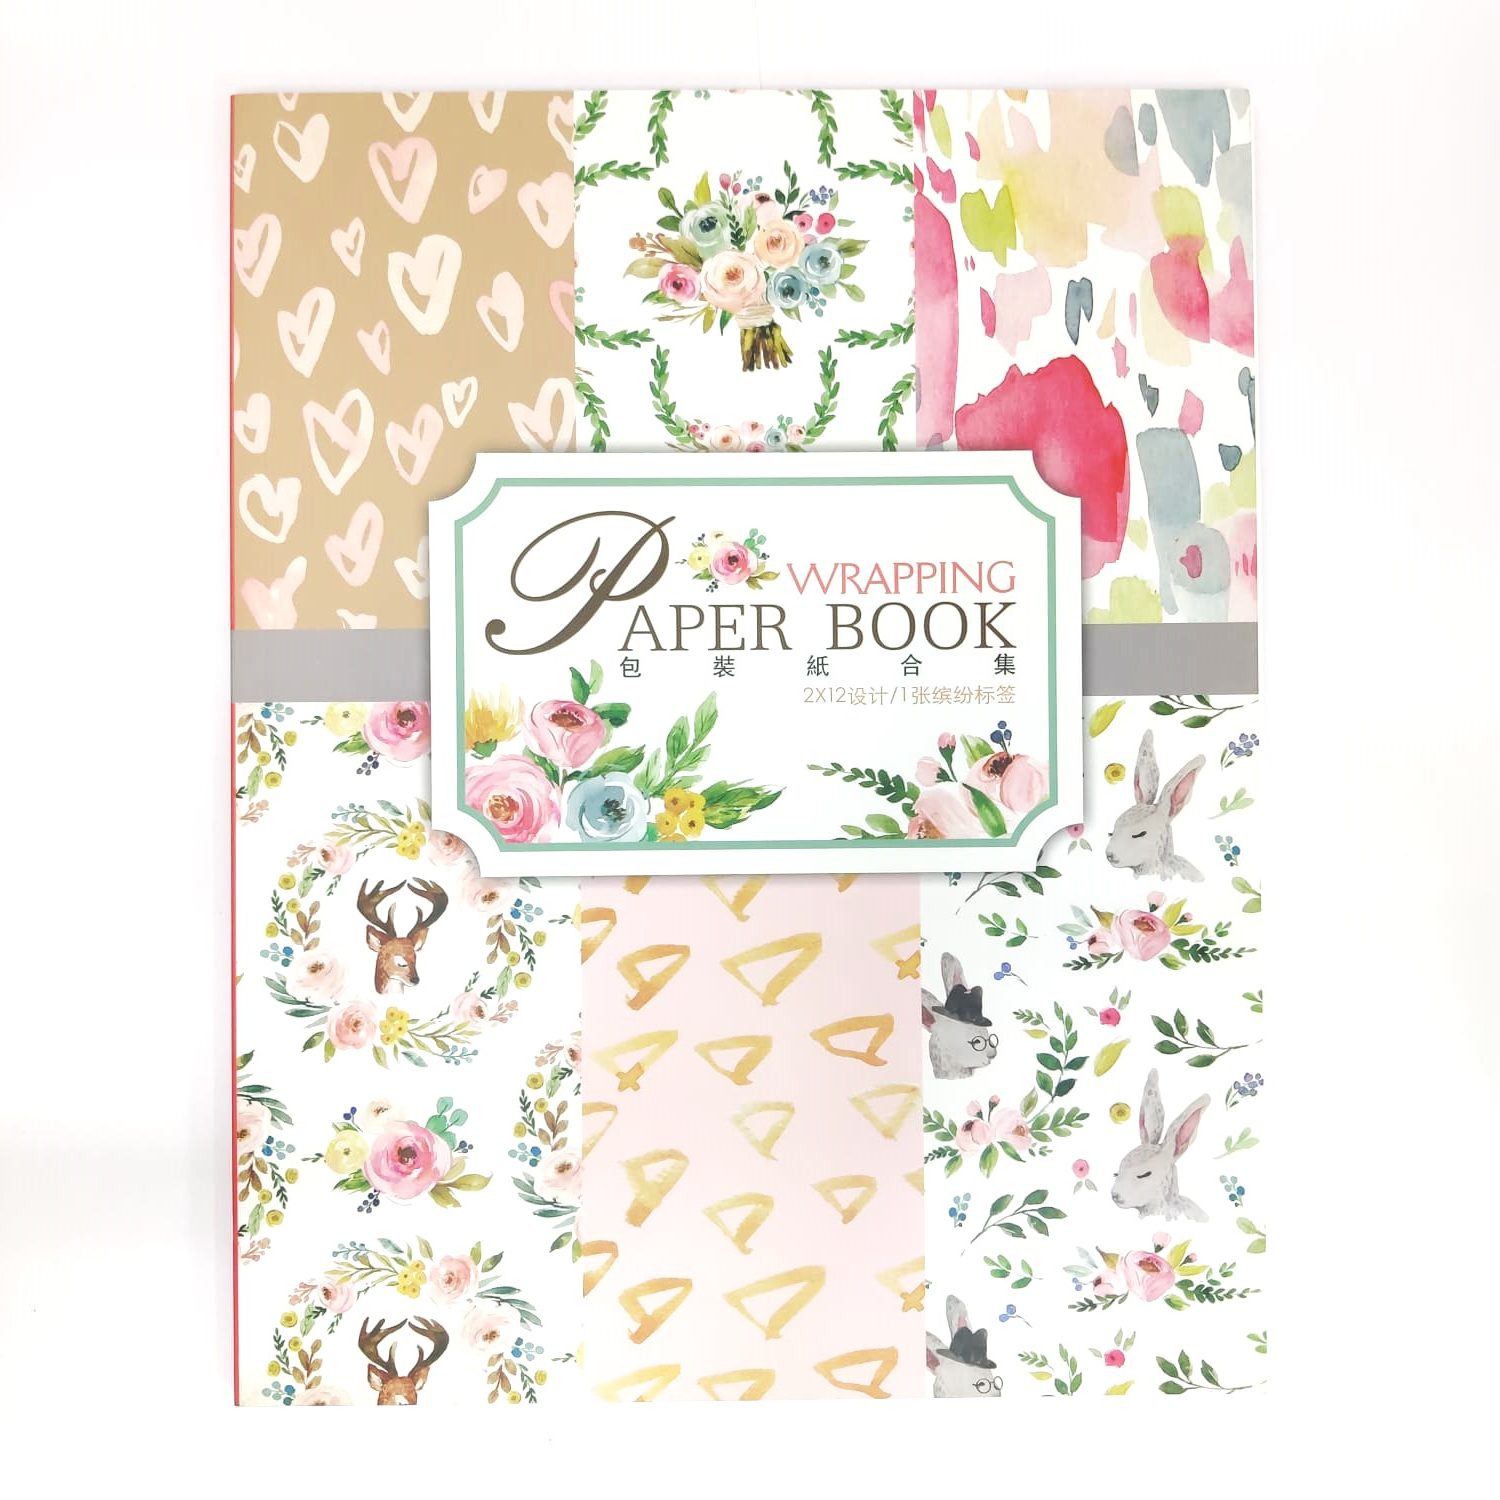 Floral Love A3 wrapping paper - 24sheetspack